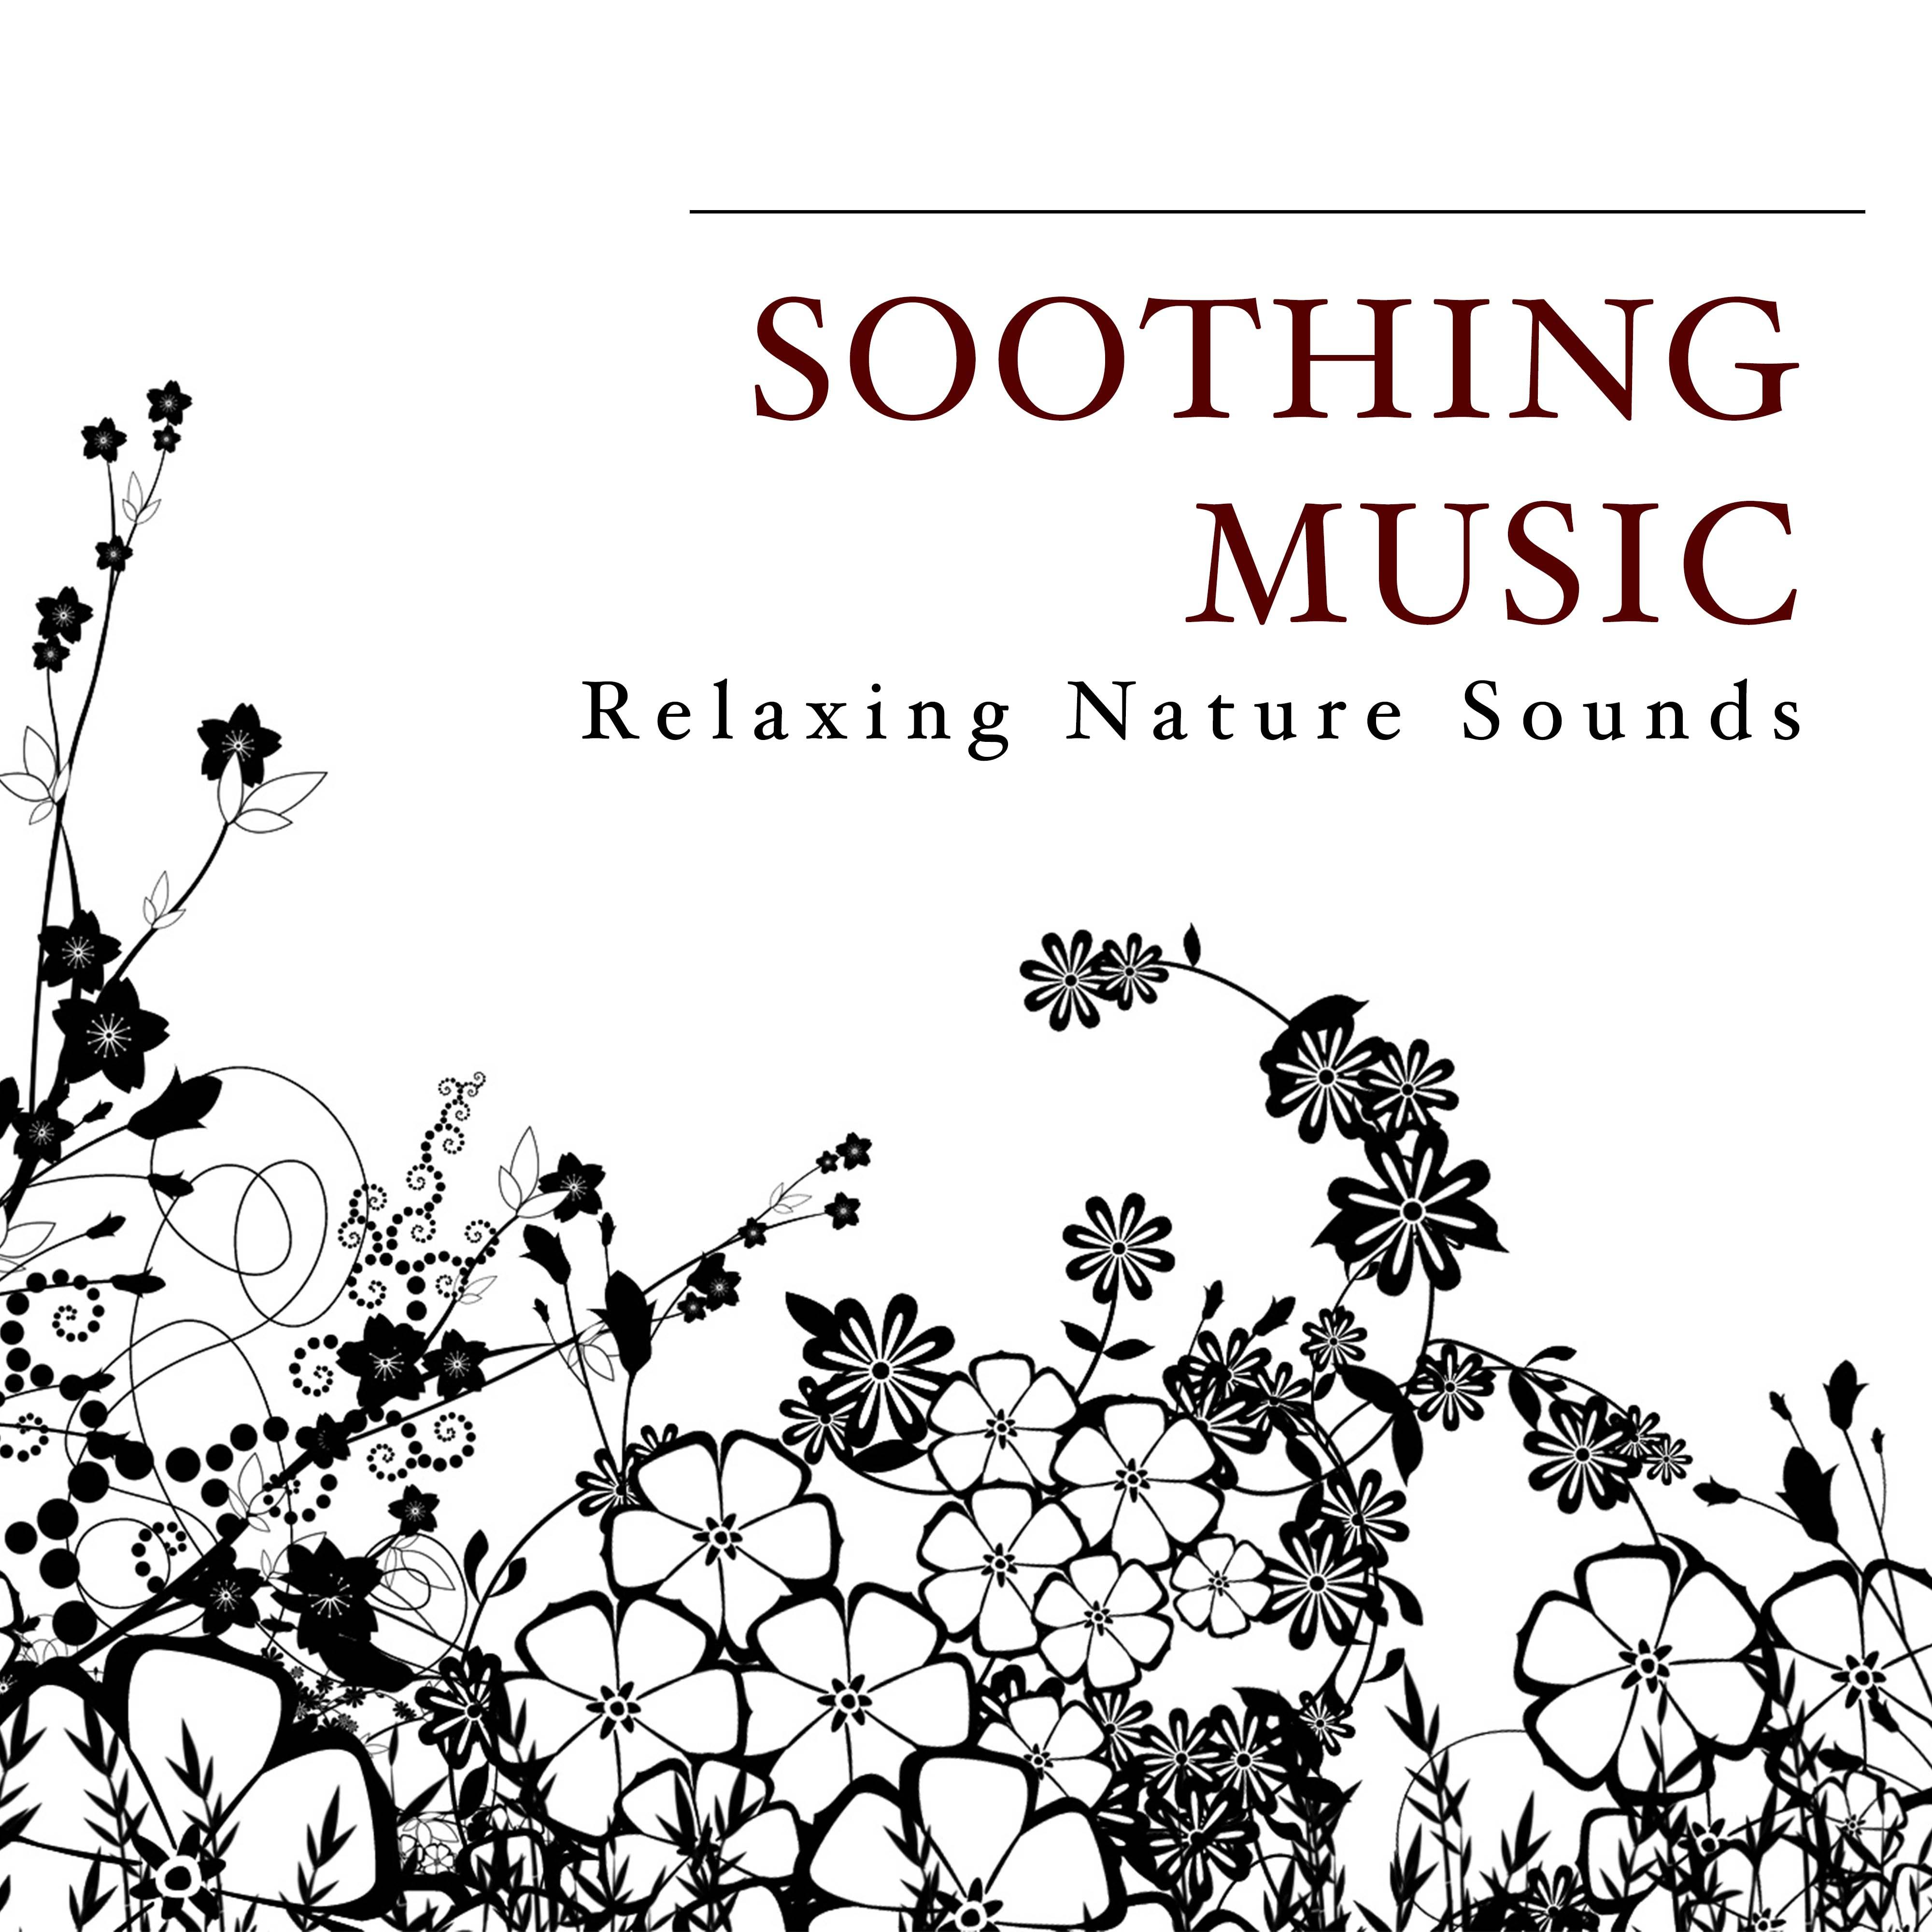 Soothing Music: Relaxing Nature Sounds